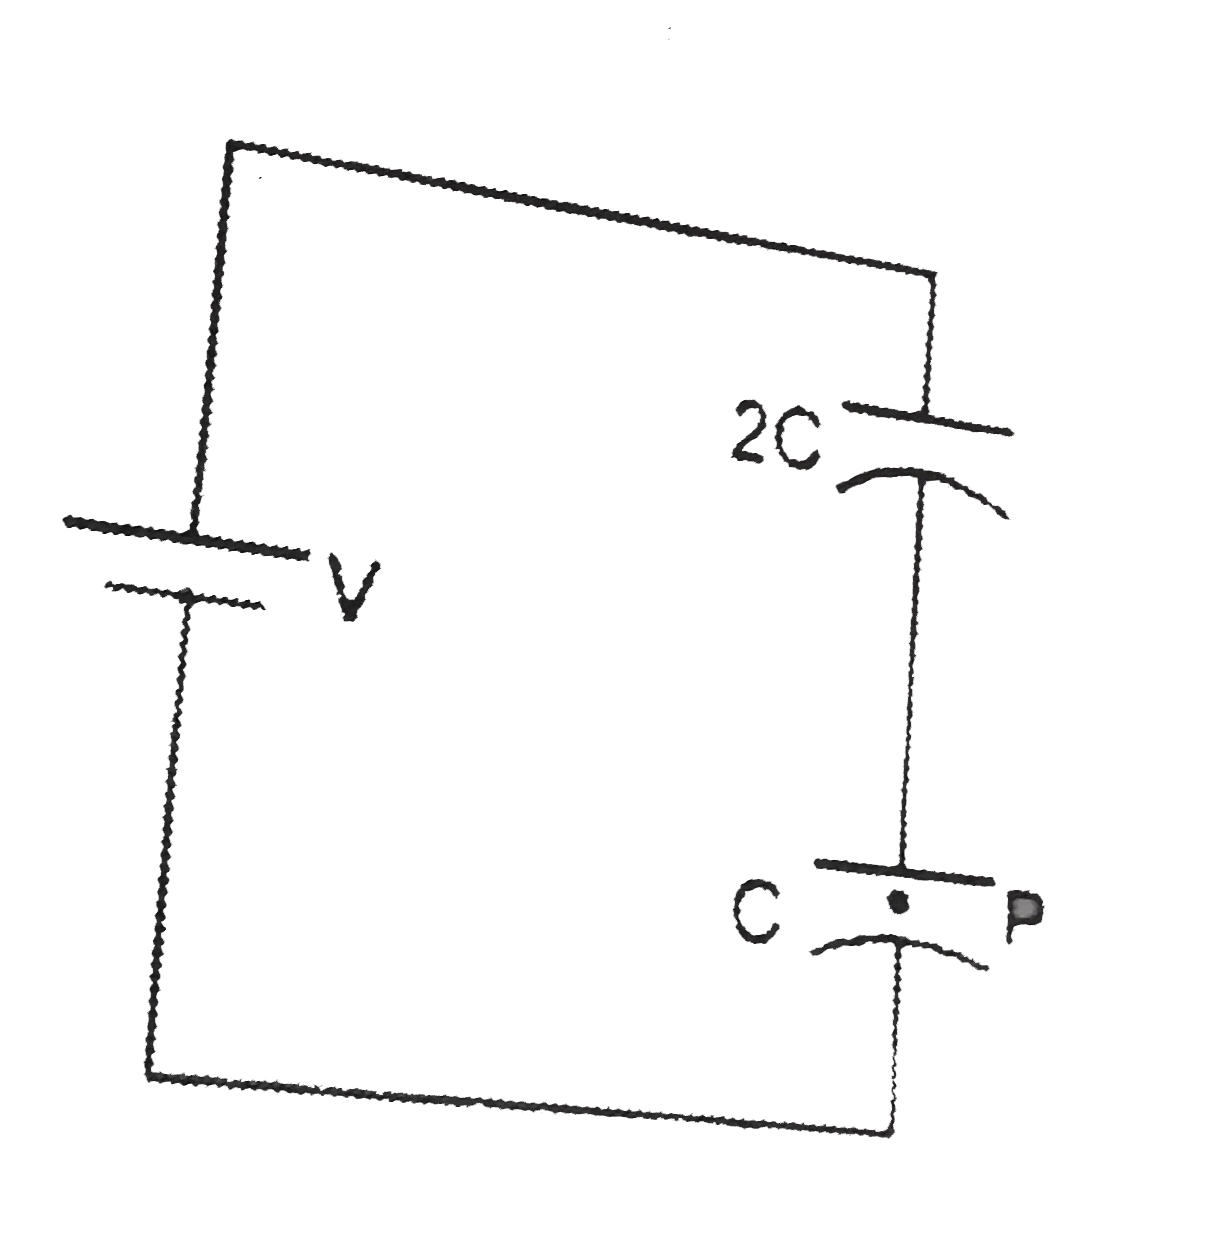 The particle  P shown  in the figure has a mass m and a charge -q. Each horizontal plate has a surface area A potential  difference  V=n((mg epsilon(0)A)/(2qc)) should be applied  to the combination  to hold the particle p in equilibrium then find the value of n.